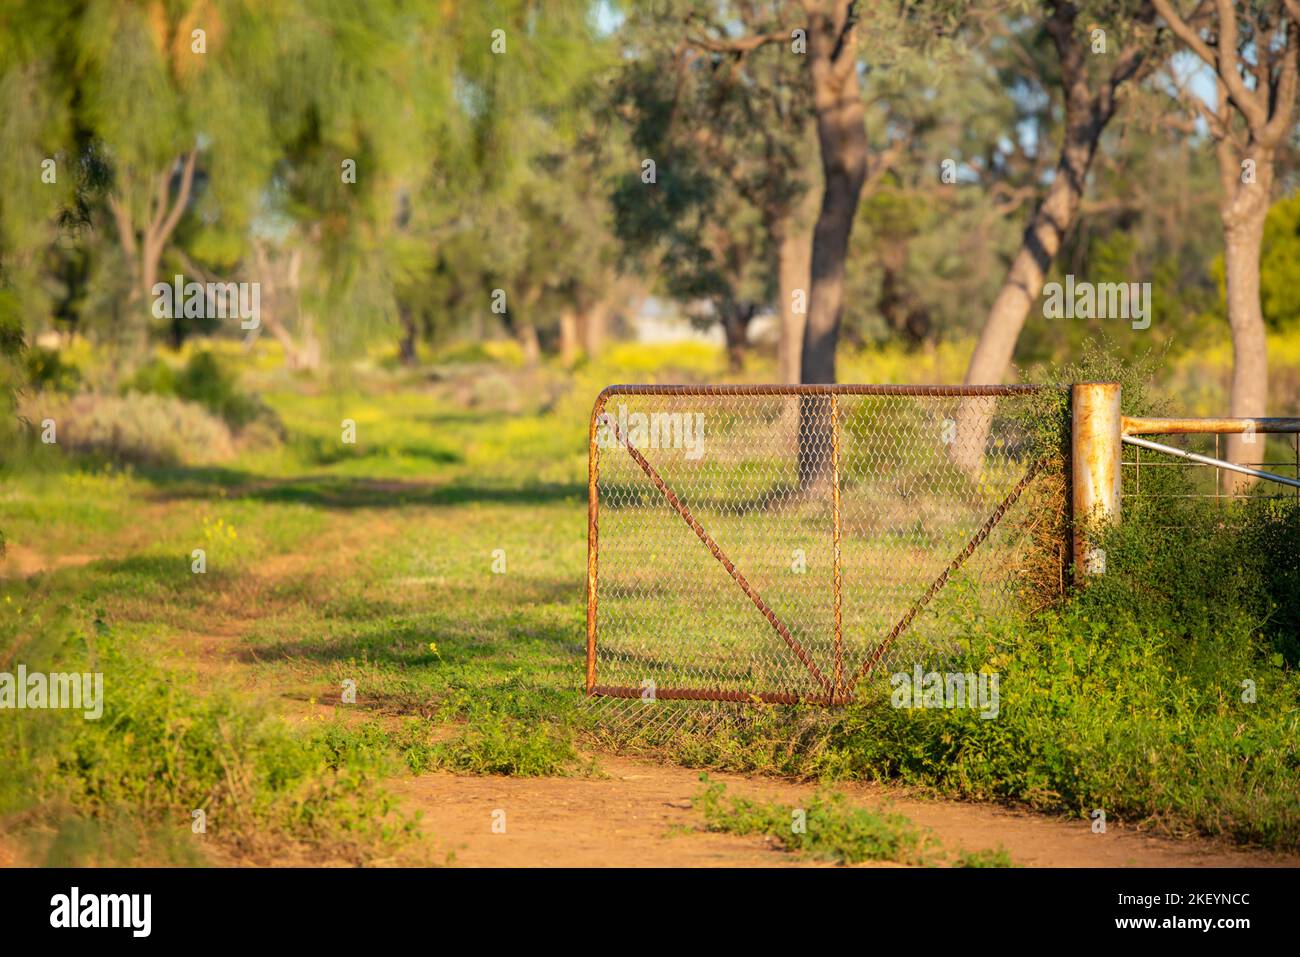 Sept 2022, An open farm gate and a dirt road overgrown with lush green growth, from recent rains, on a farm in northwestern New South Wales, Australia Stock Photo